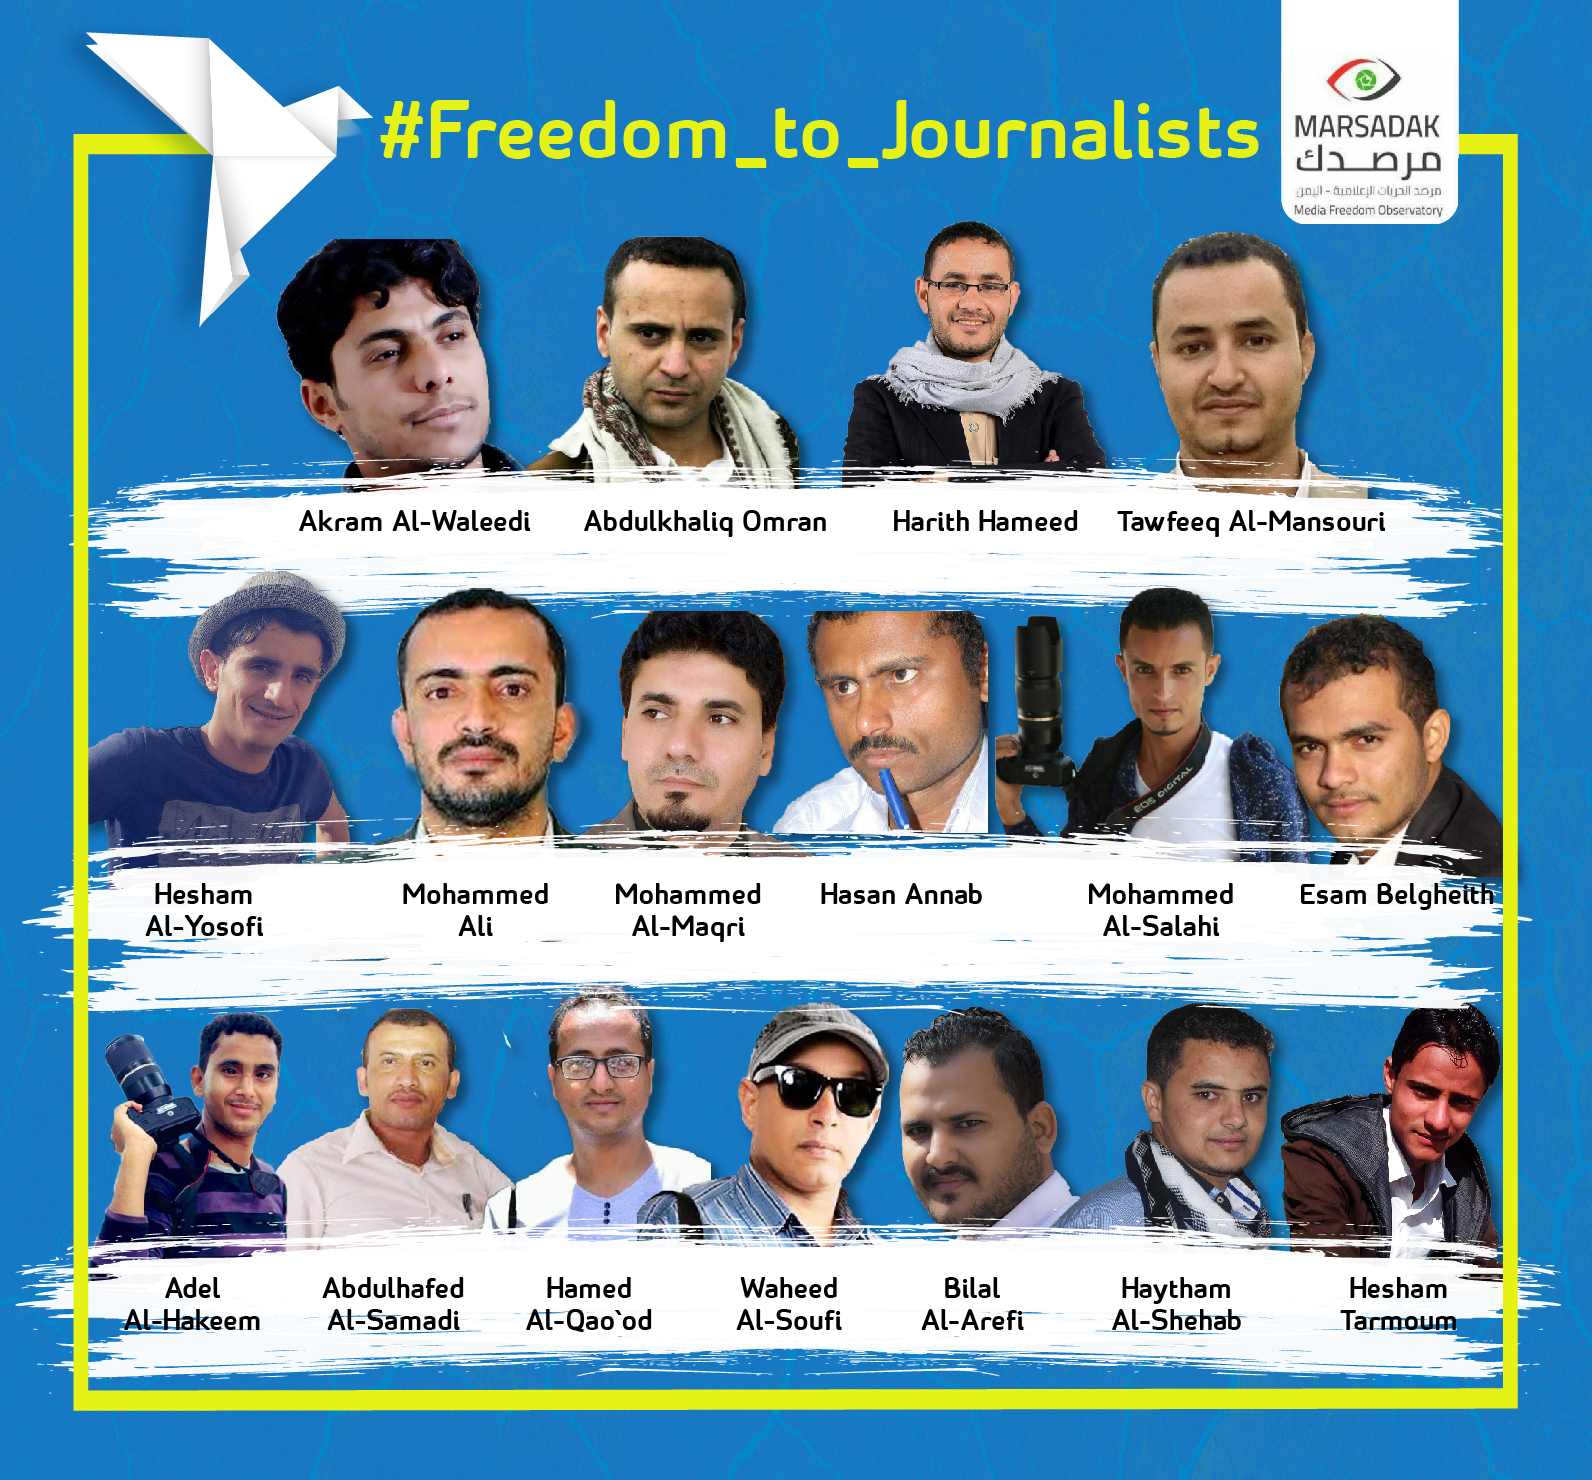 On World Press Freedom Day, Media Freedom Observatory calls for saving journalists from execution